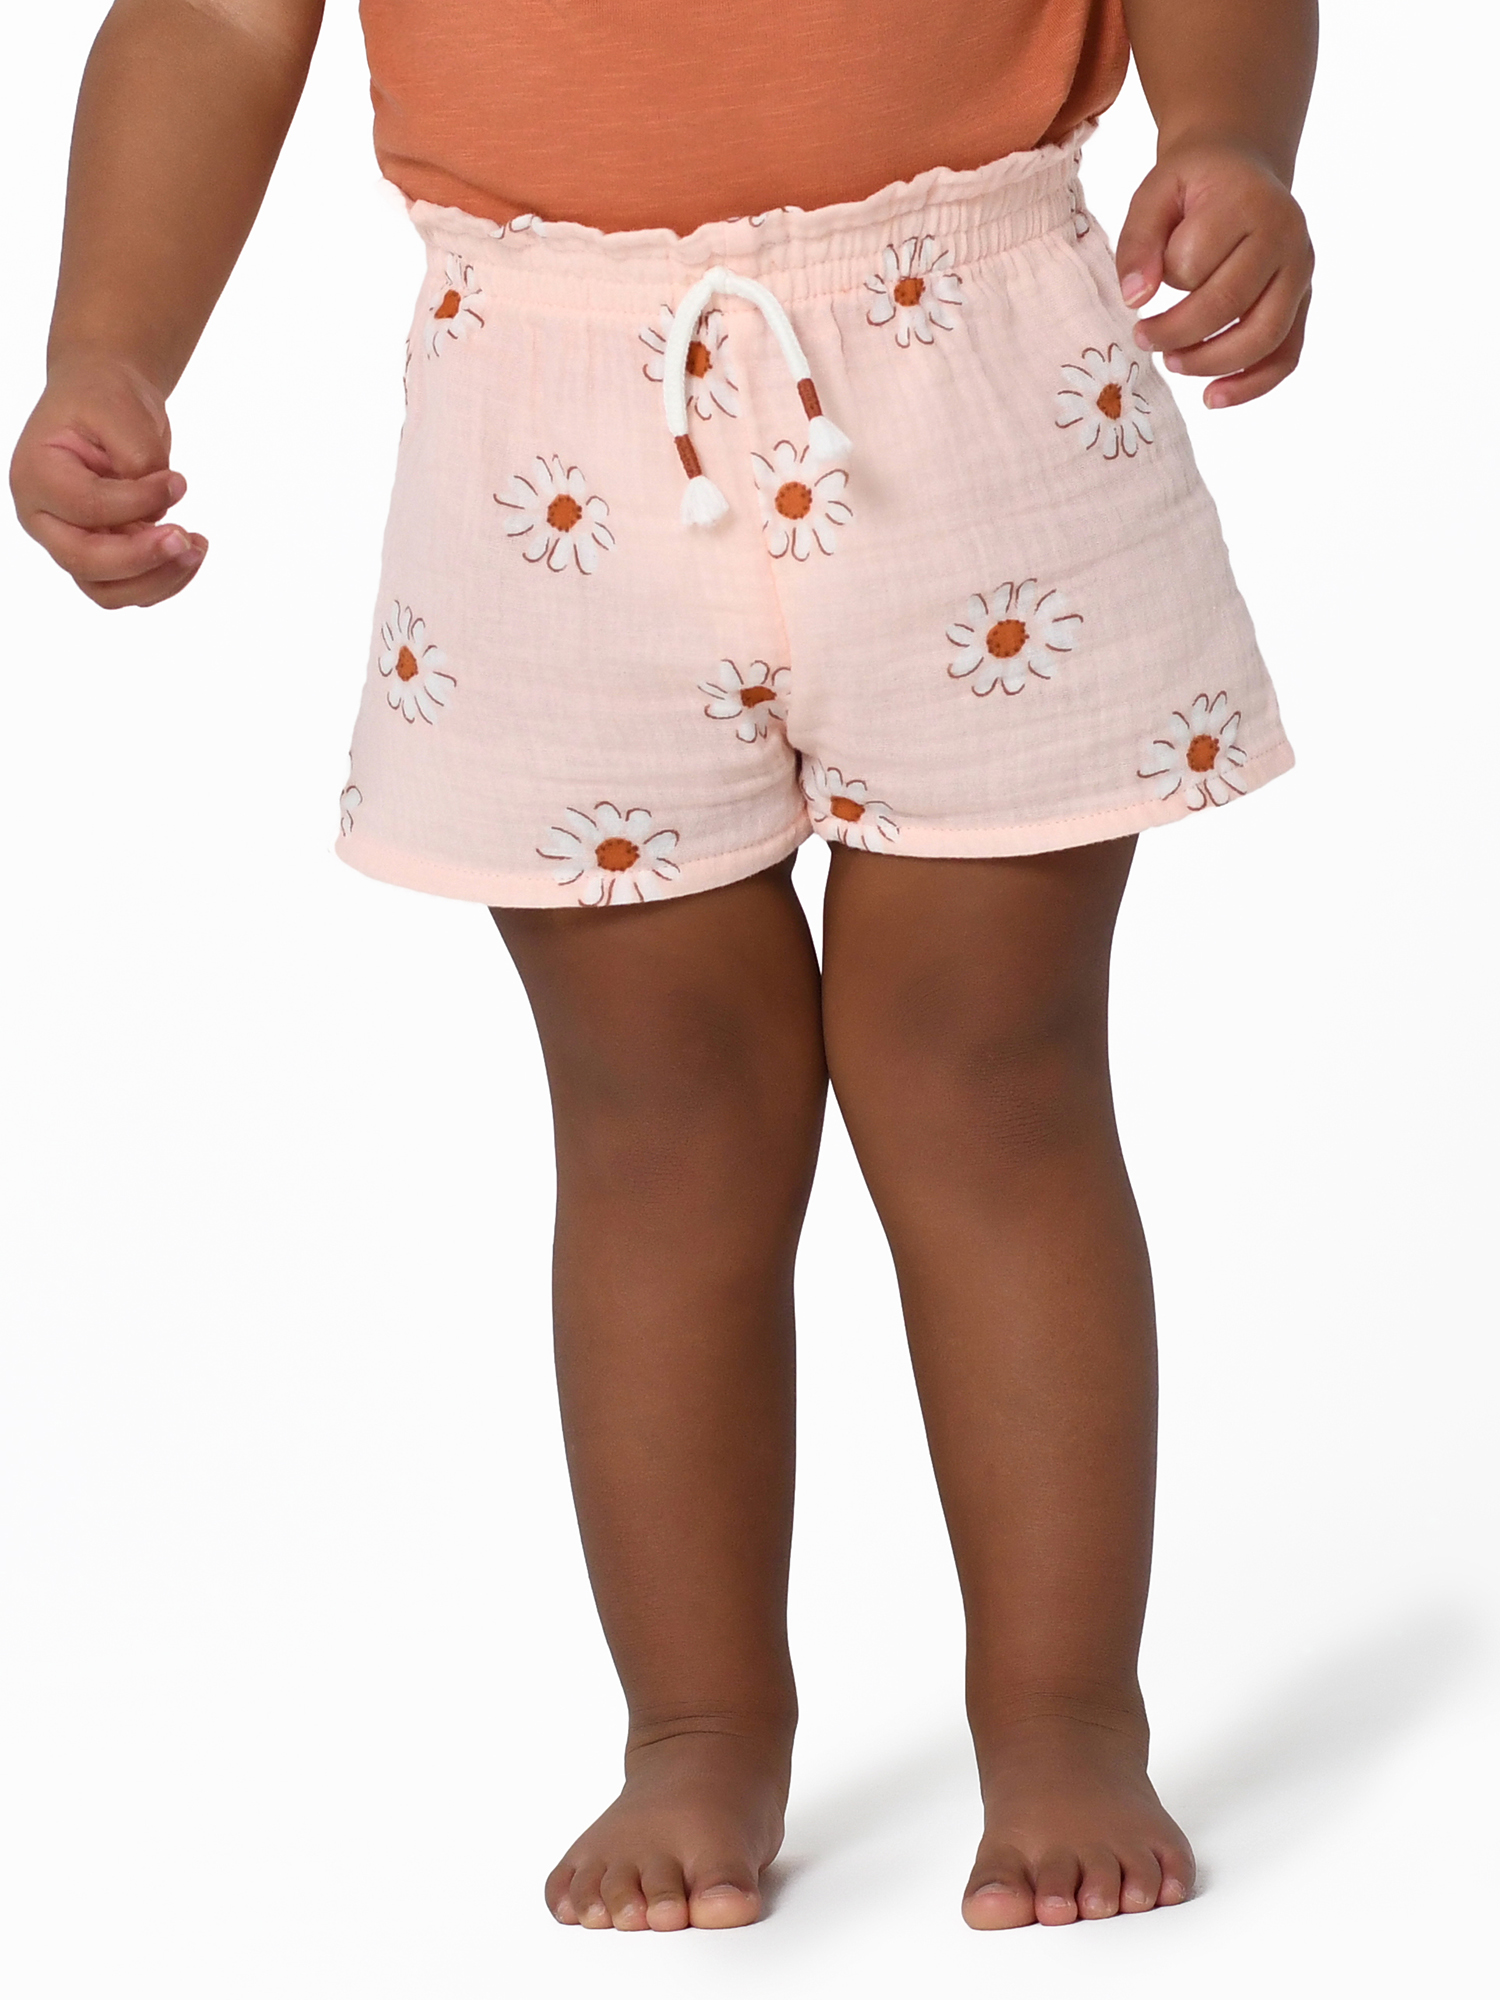 Modern Moments by Gerber Toddler Girl Gauze Shorts, 2-Pack, Sizes 12M-5T - image 5 of 13